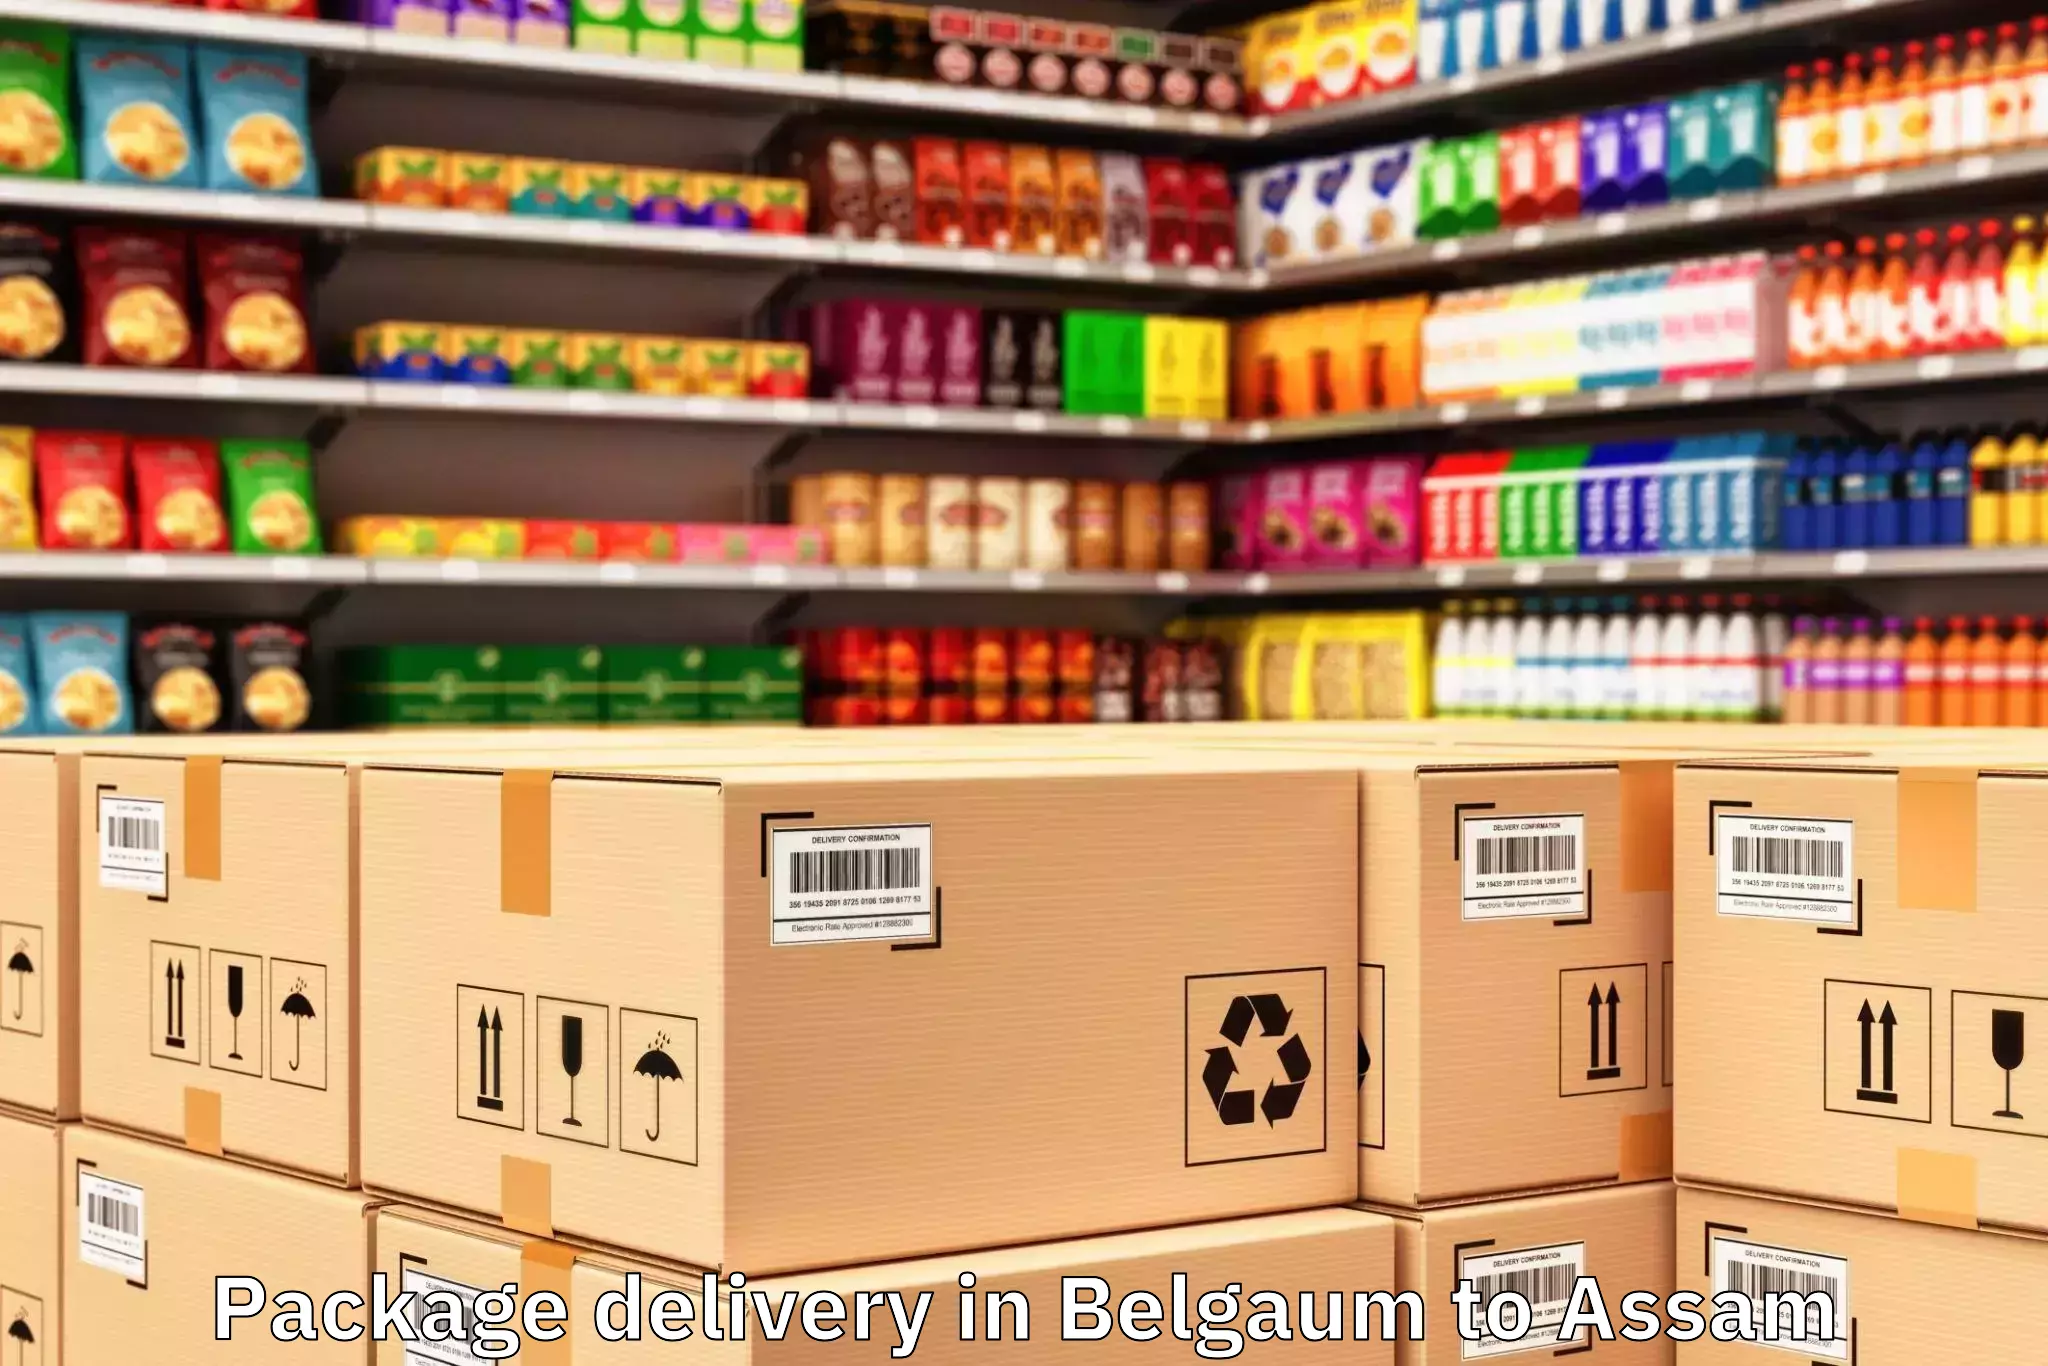 Belgaum to Hojai Package Delivery